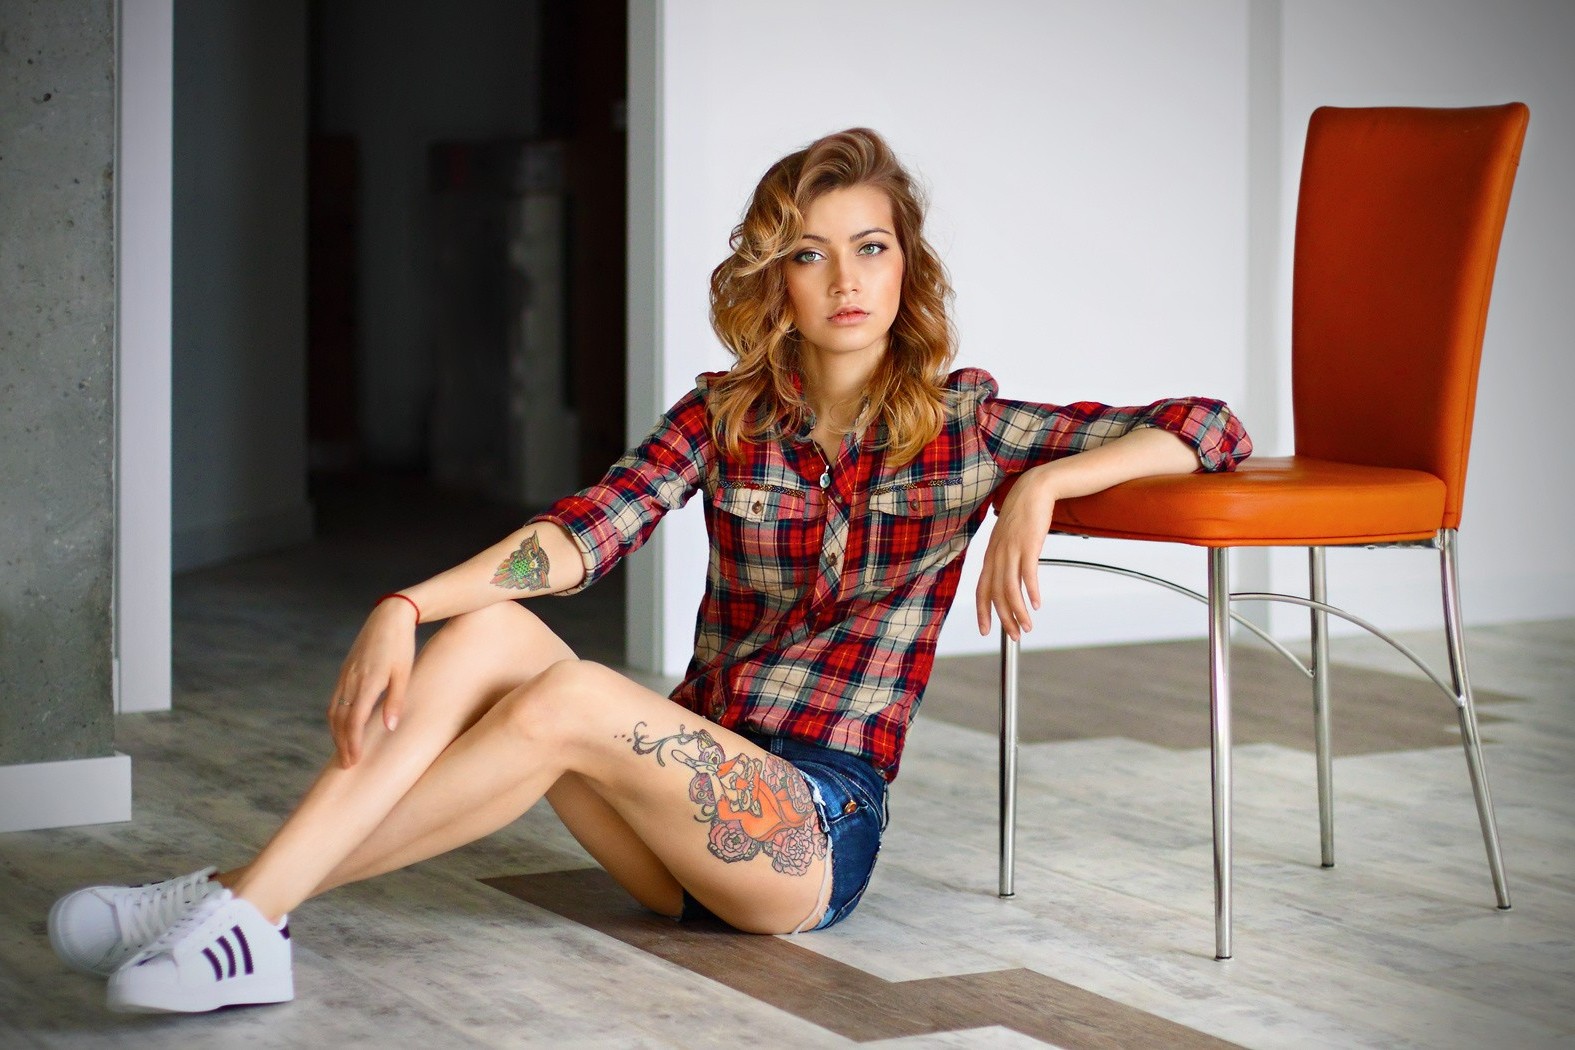 women, Sitting, Tattoos, Looking At Viewer, Ass, Chair, Jean Shorts, Sneakers, On The Floor Wallpaper